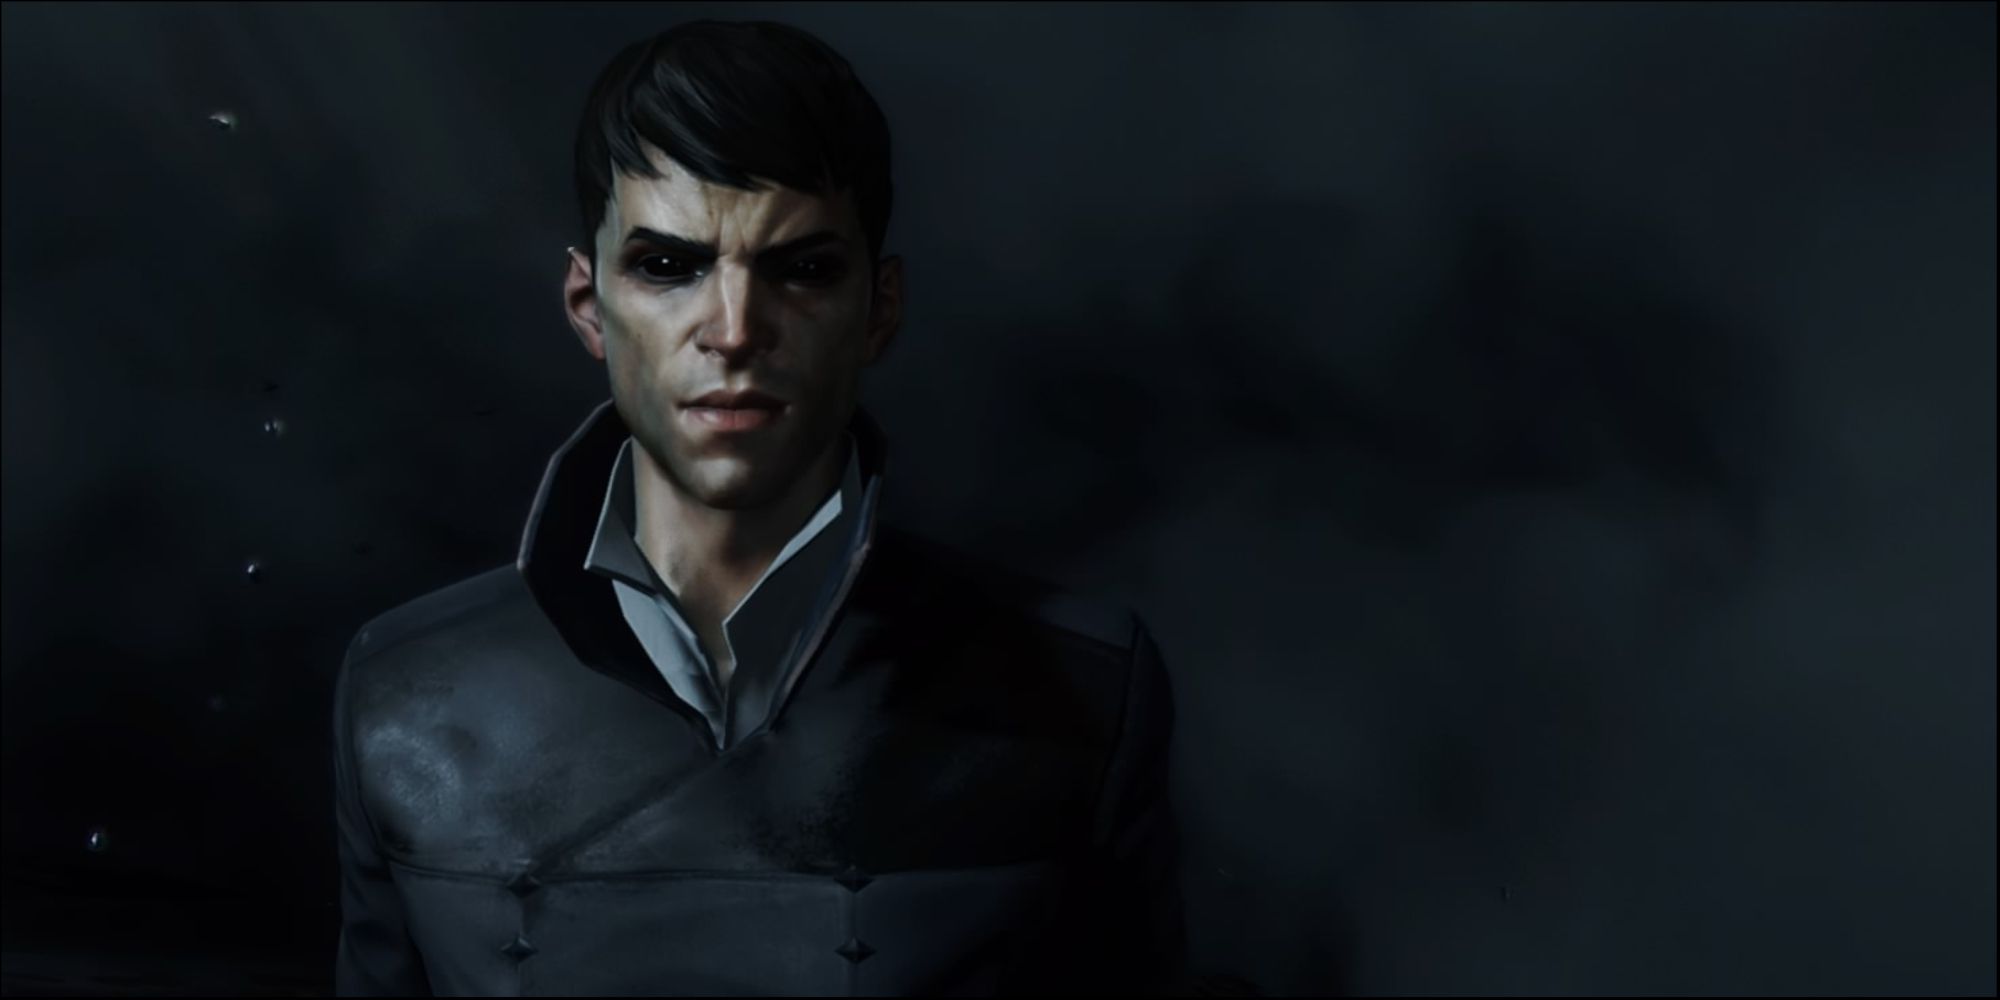 Dishonored 2 - The Outsider in the void